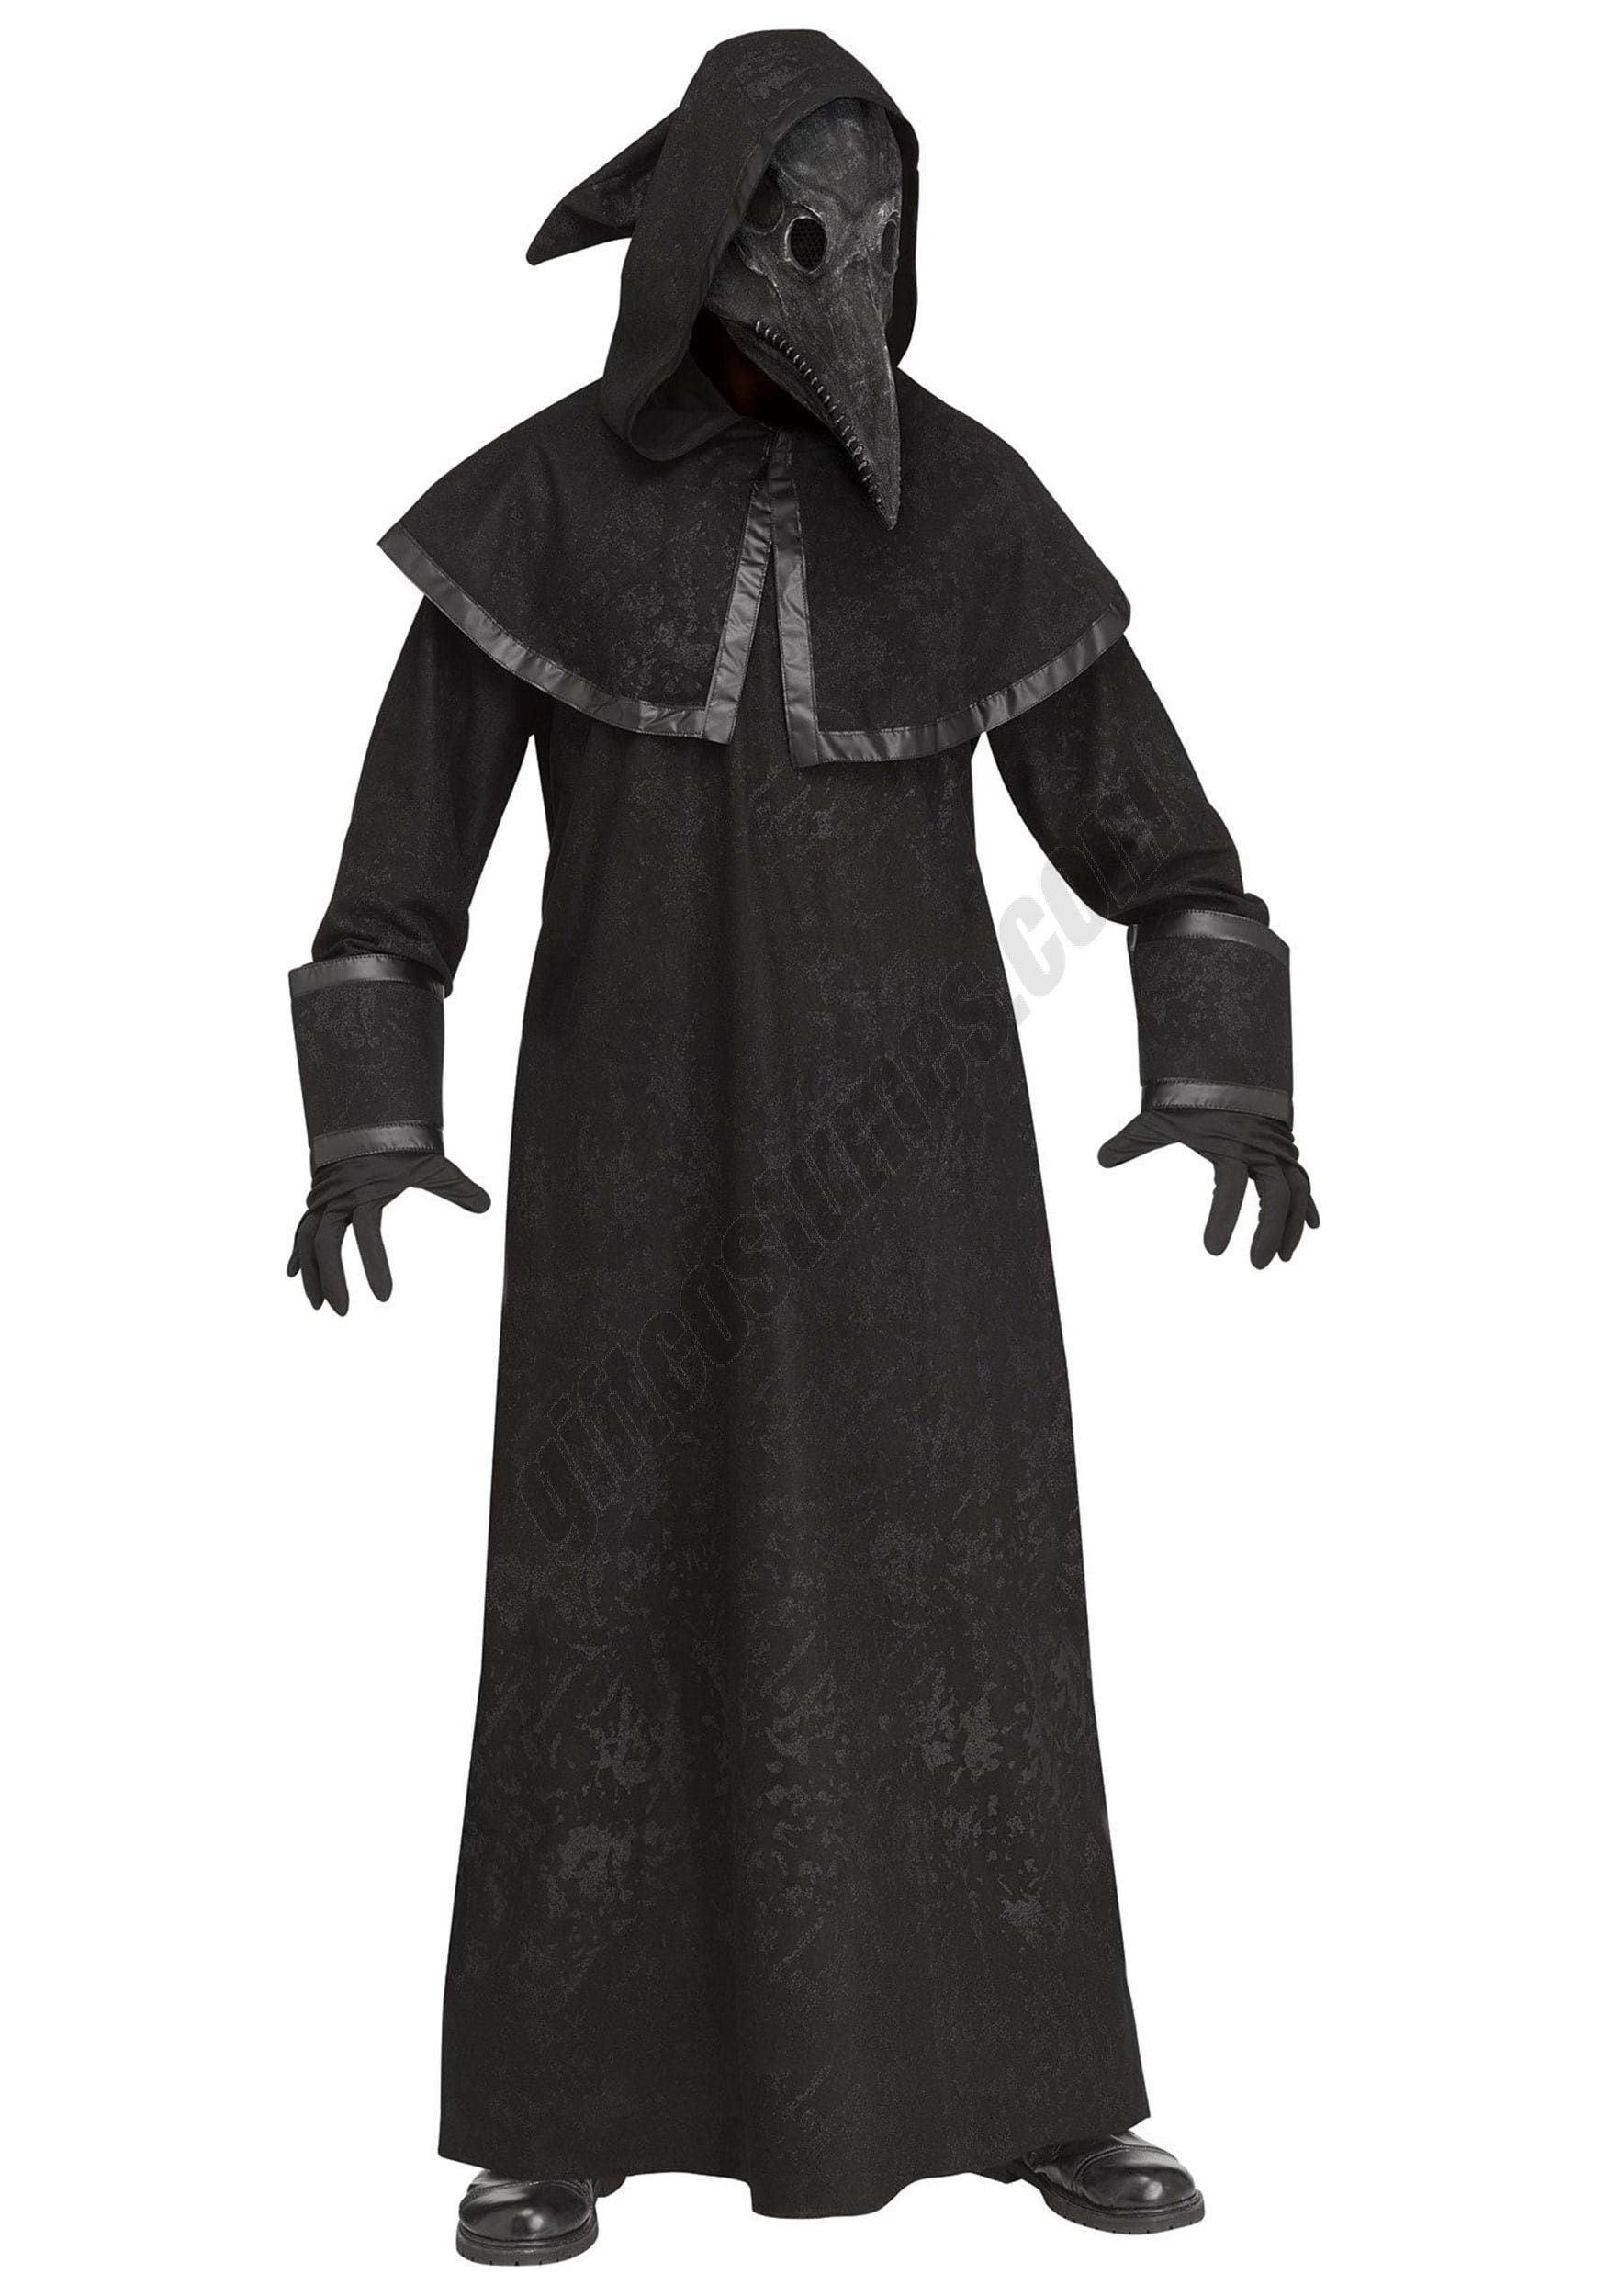 Black Plague Doctor Costume for Adults - Women's - Black Plague Doctor Costume for Adults - Women's